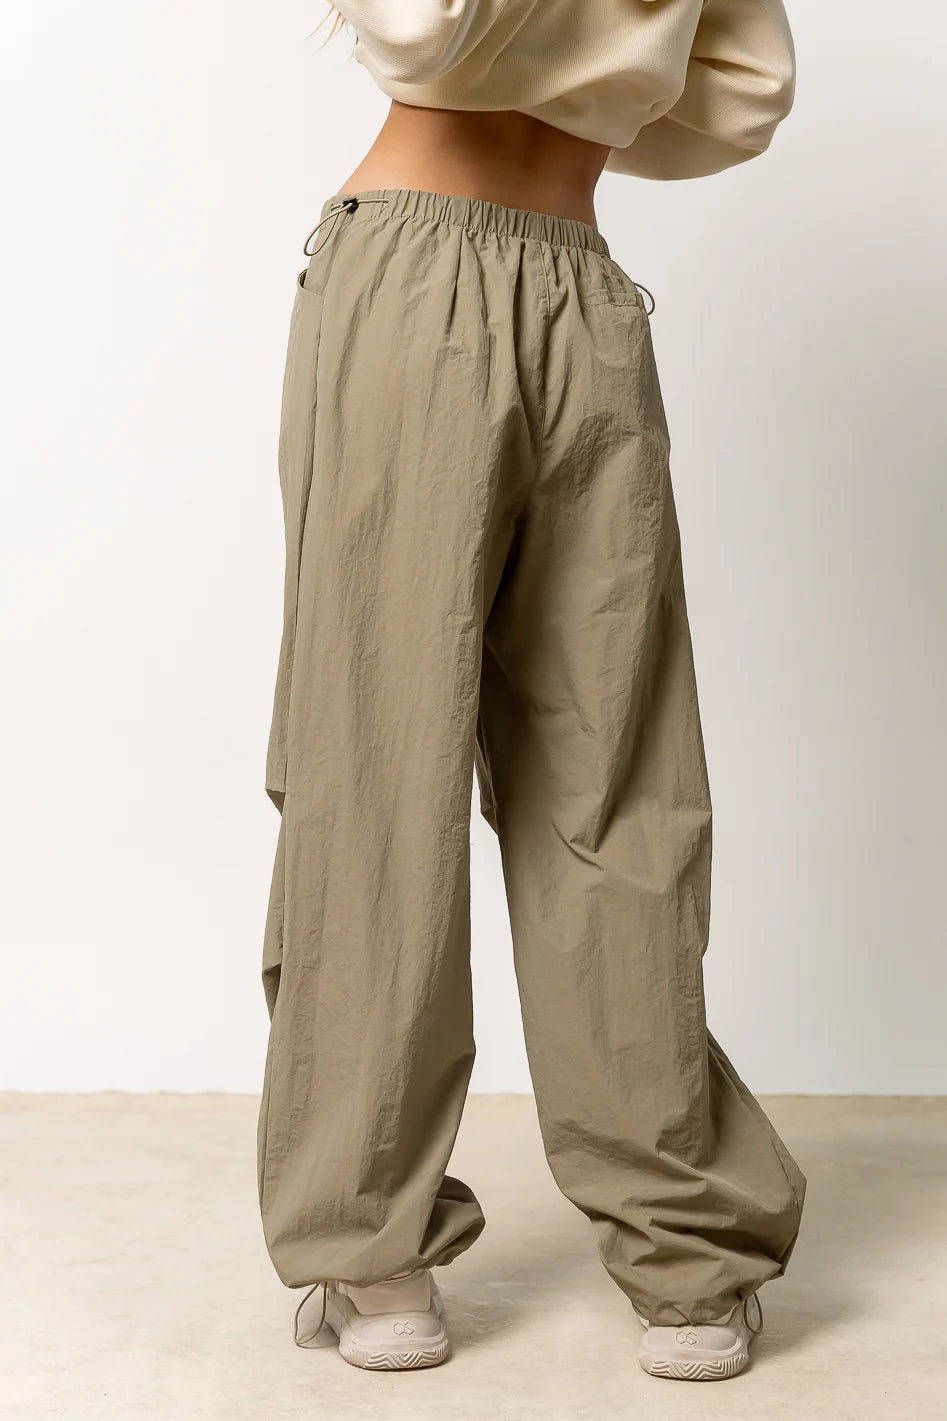 Adjustable Cuff Nylon Parachute Pants in Olive